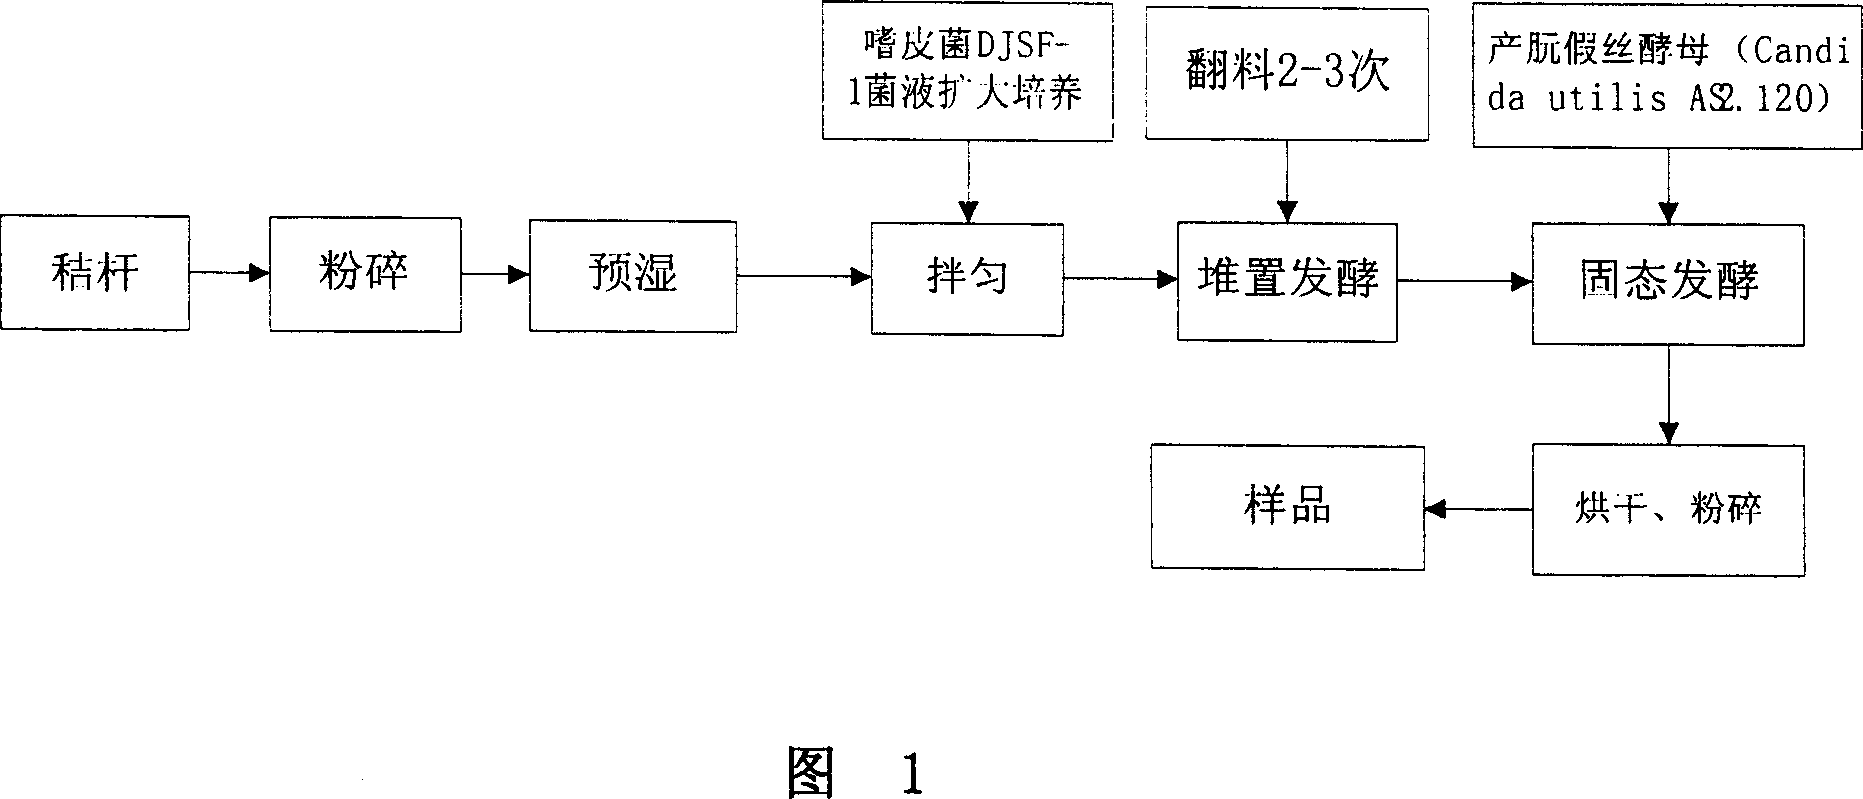 Method for degrading rice grass cellulose by multi-bacterium step fermentation